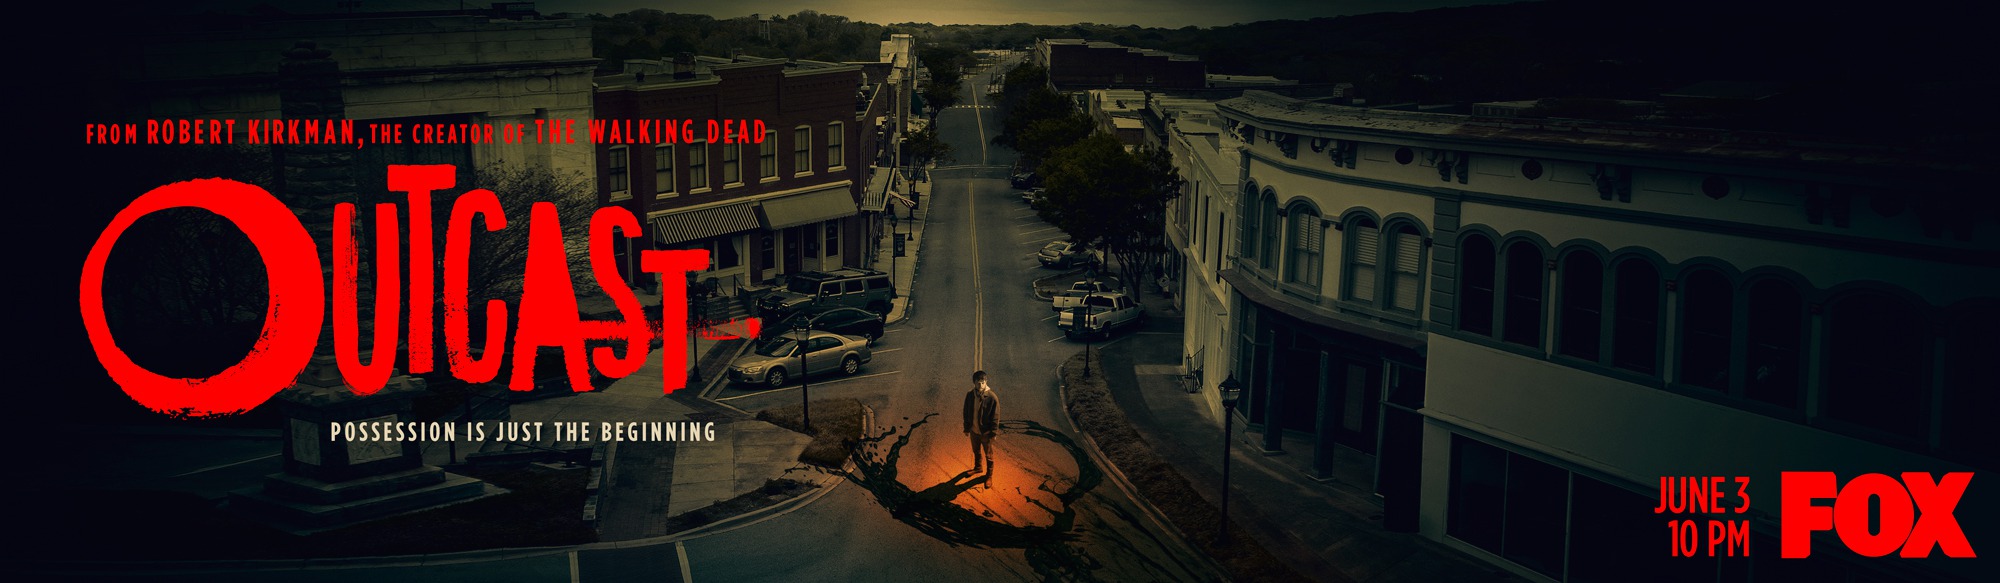 Mega Sized TV Poster Image for Outcast (#6 of 7)